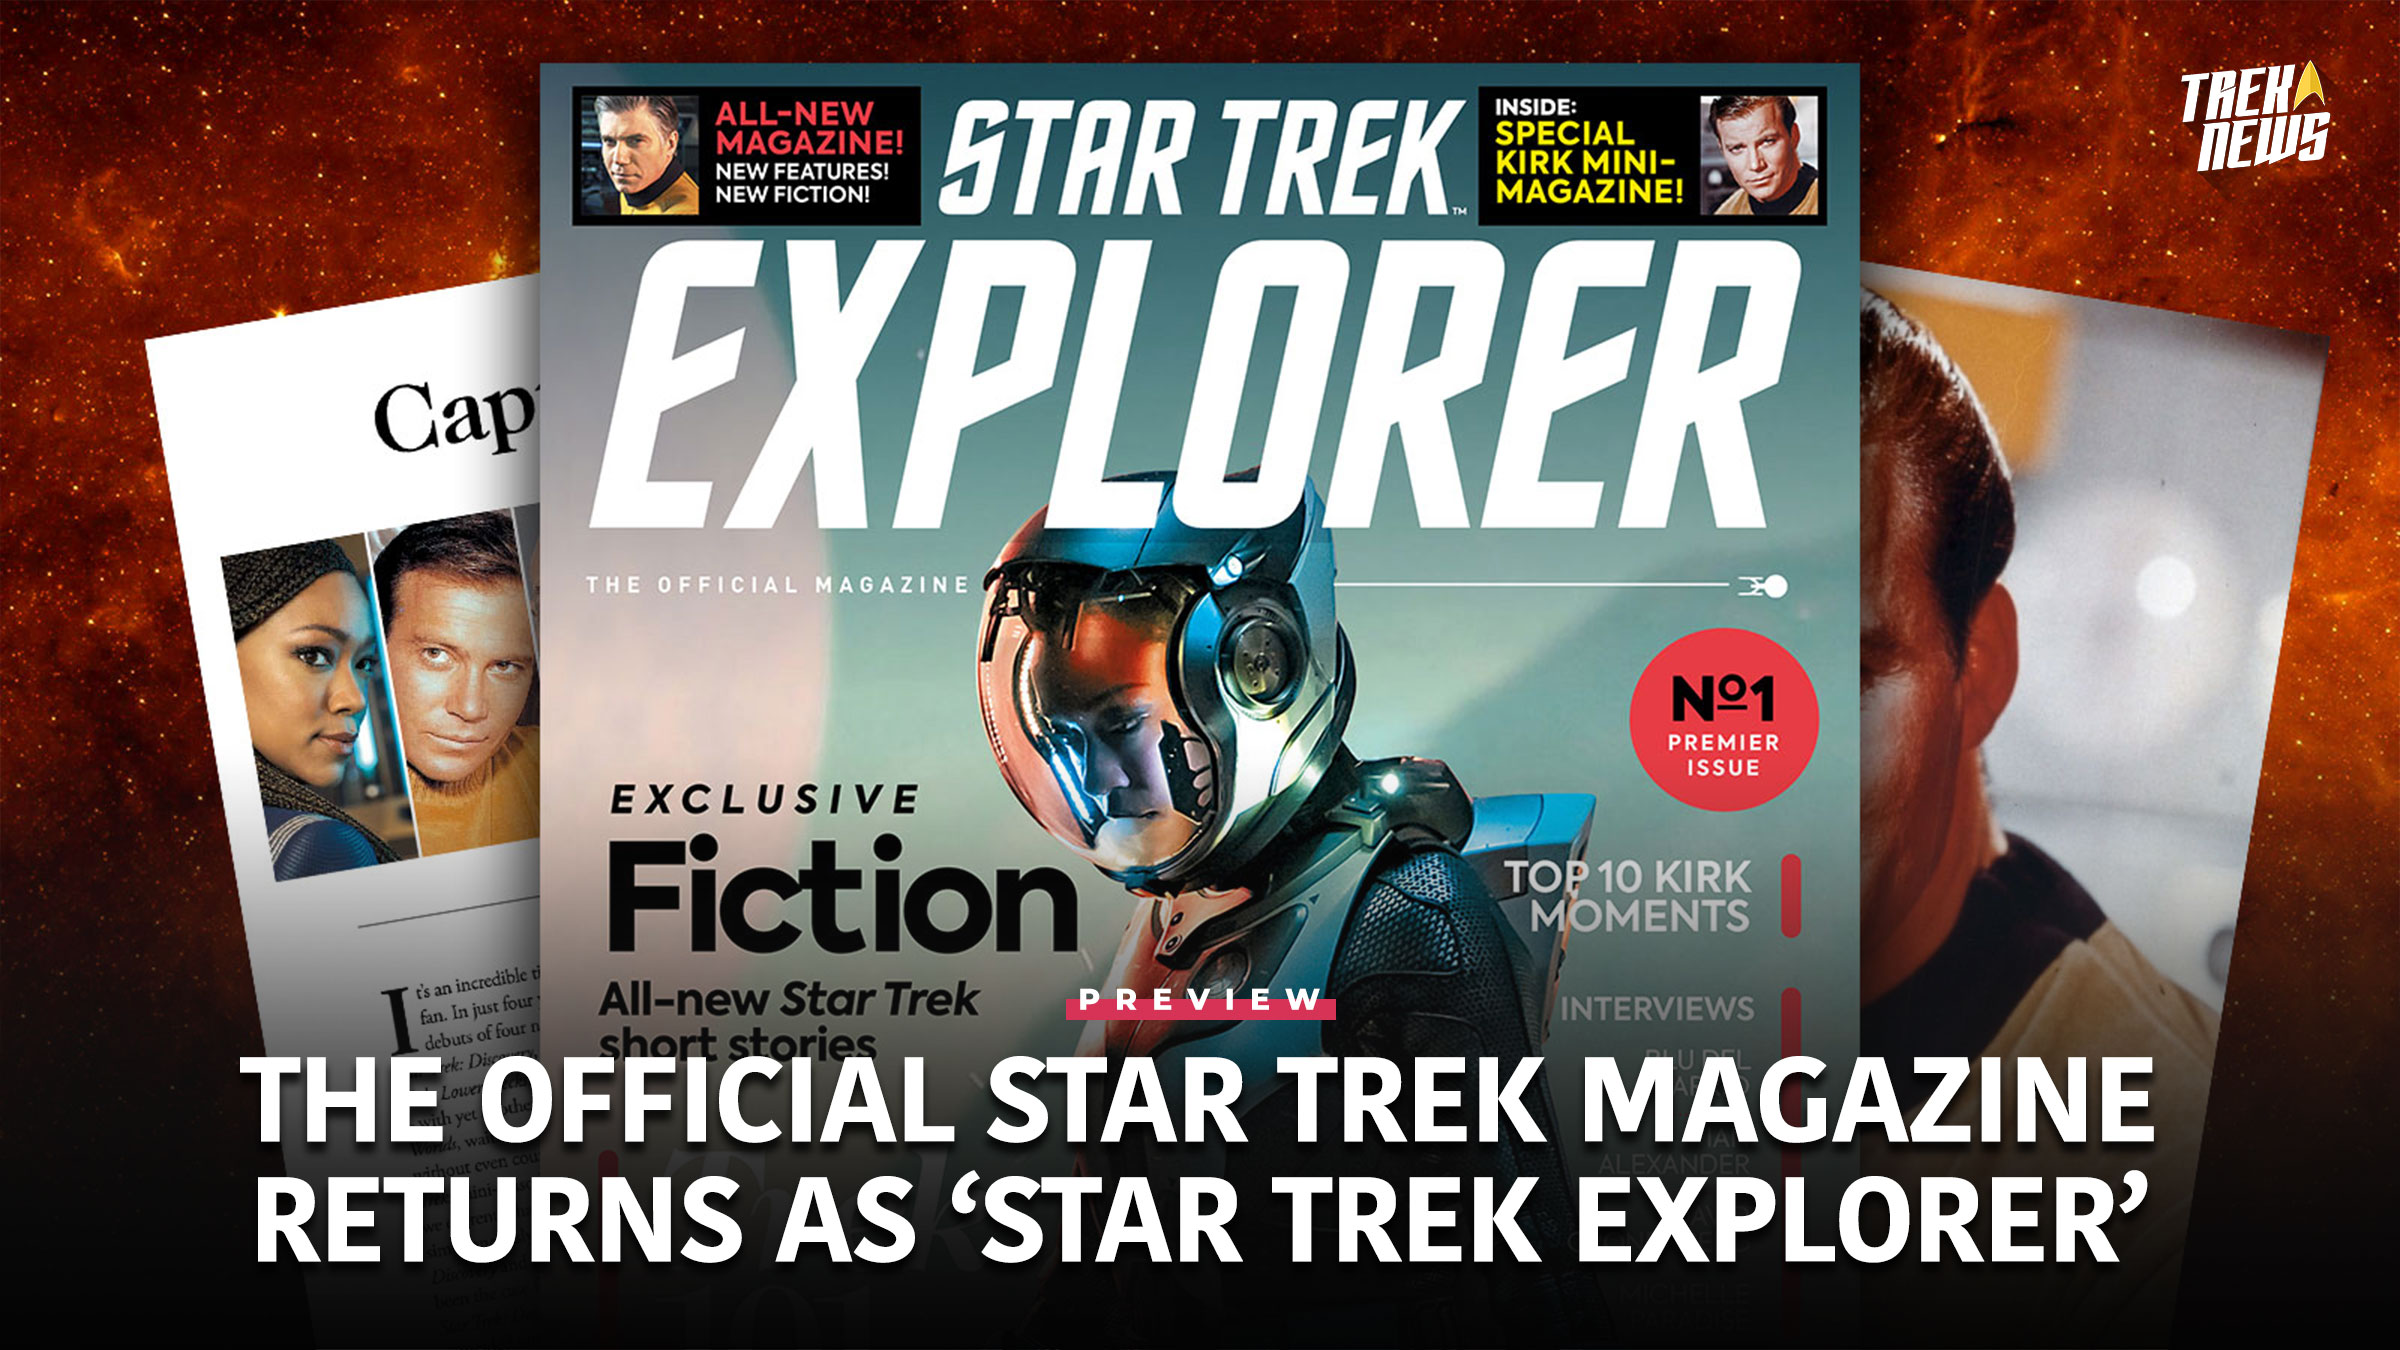 The Official Star Trek Magazine Returns As ‘Star Trek Explorer’ + Details On How You Could Win A One-Year Subscription